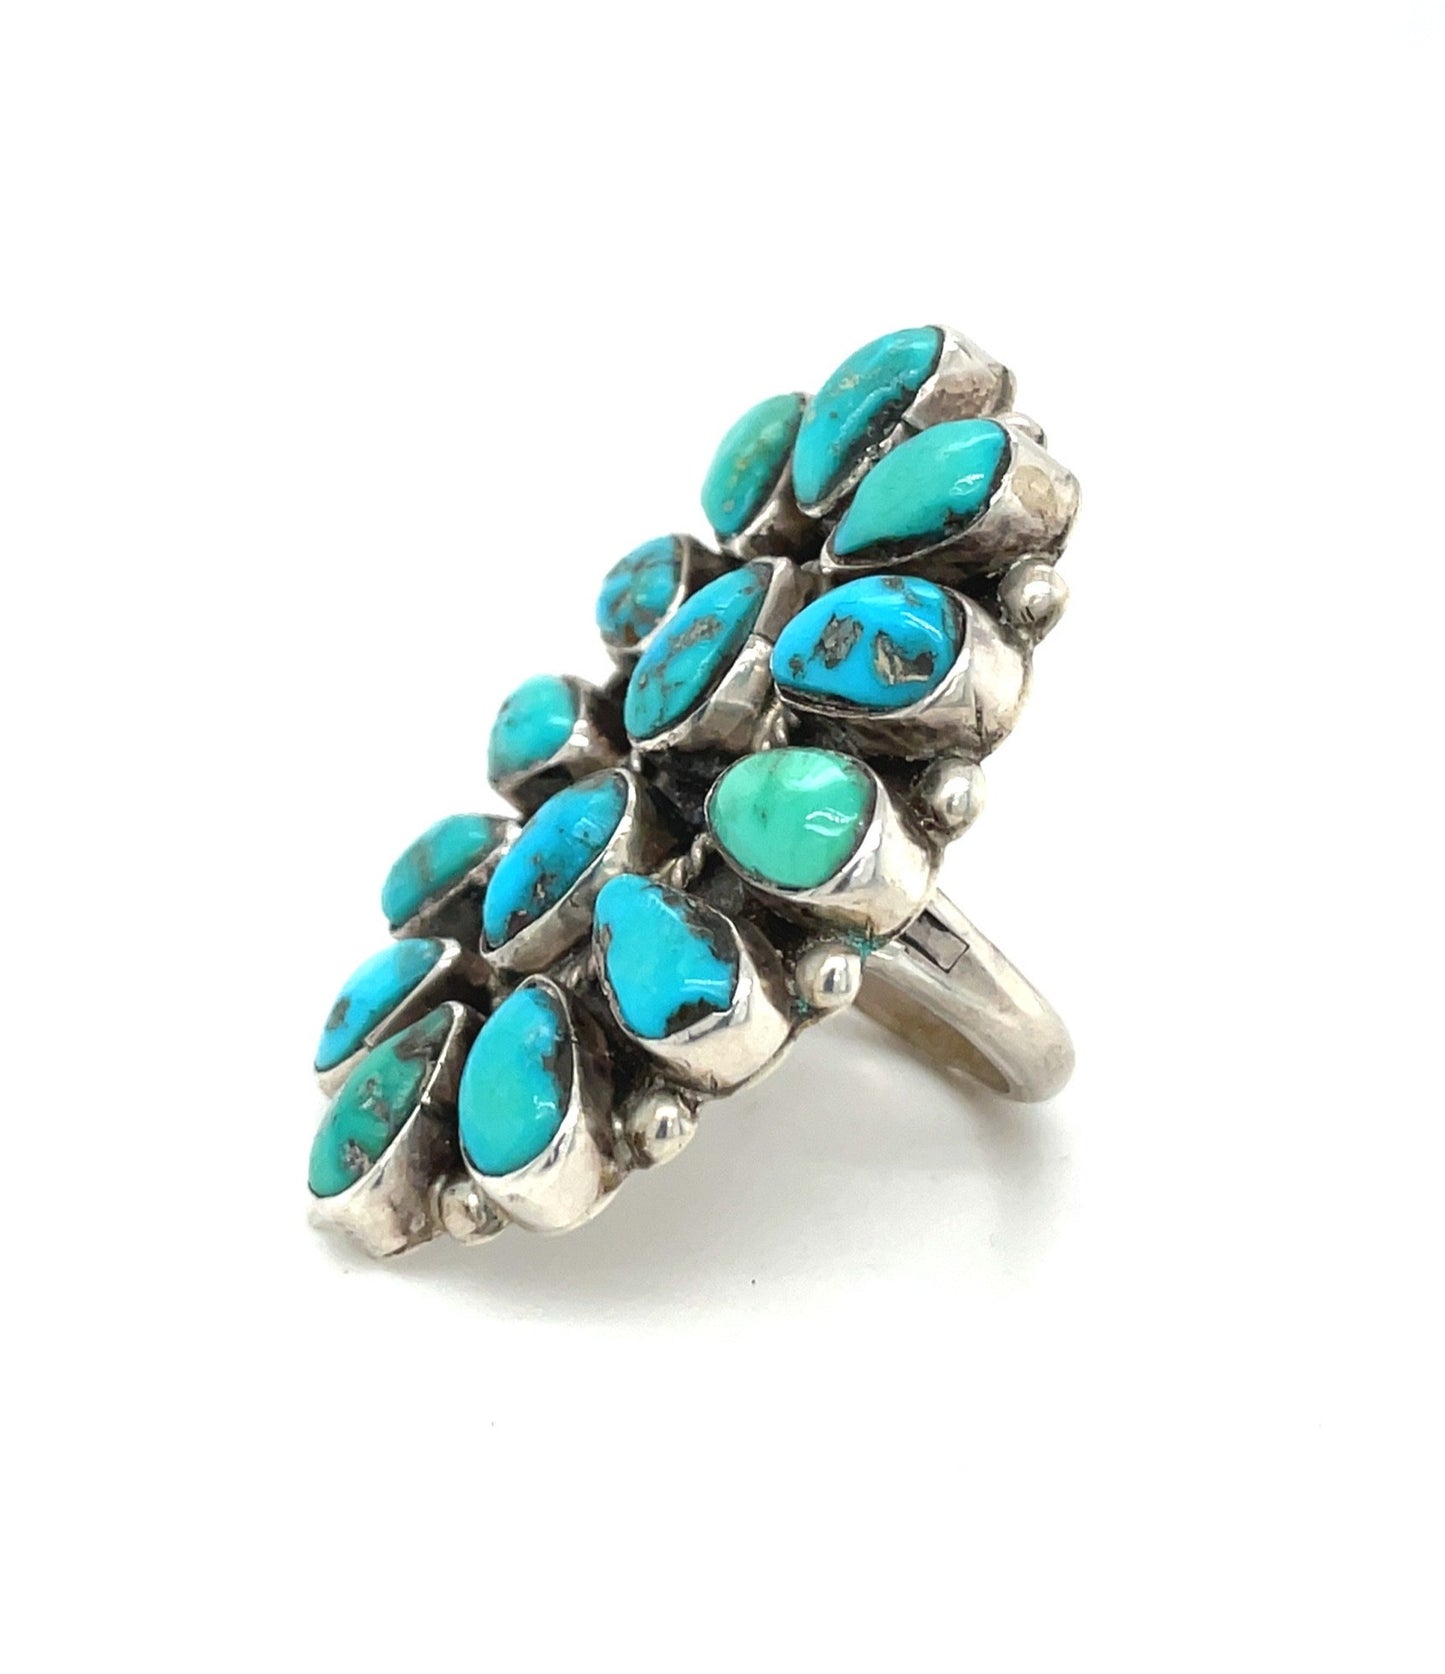 Vintage Bisbee Turquoise and Sterling Silver Ring 70’s SZ 7